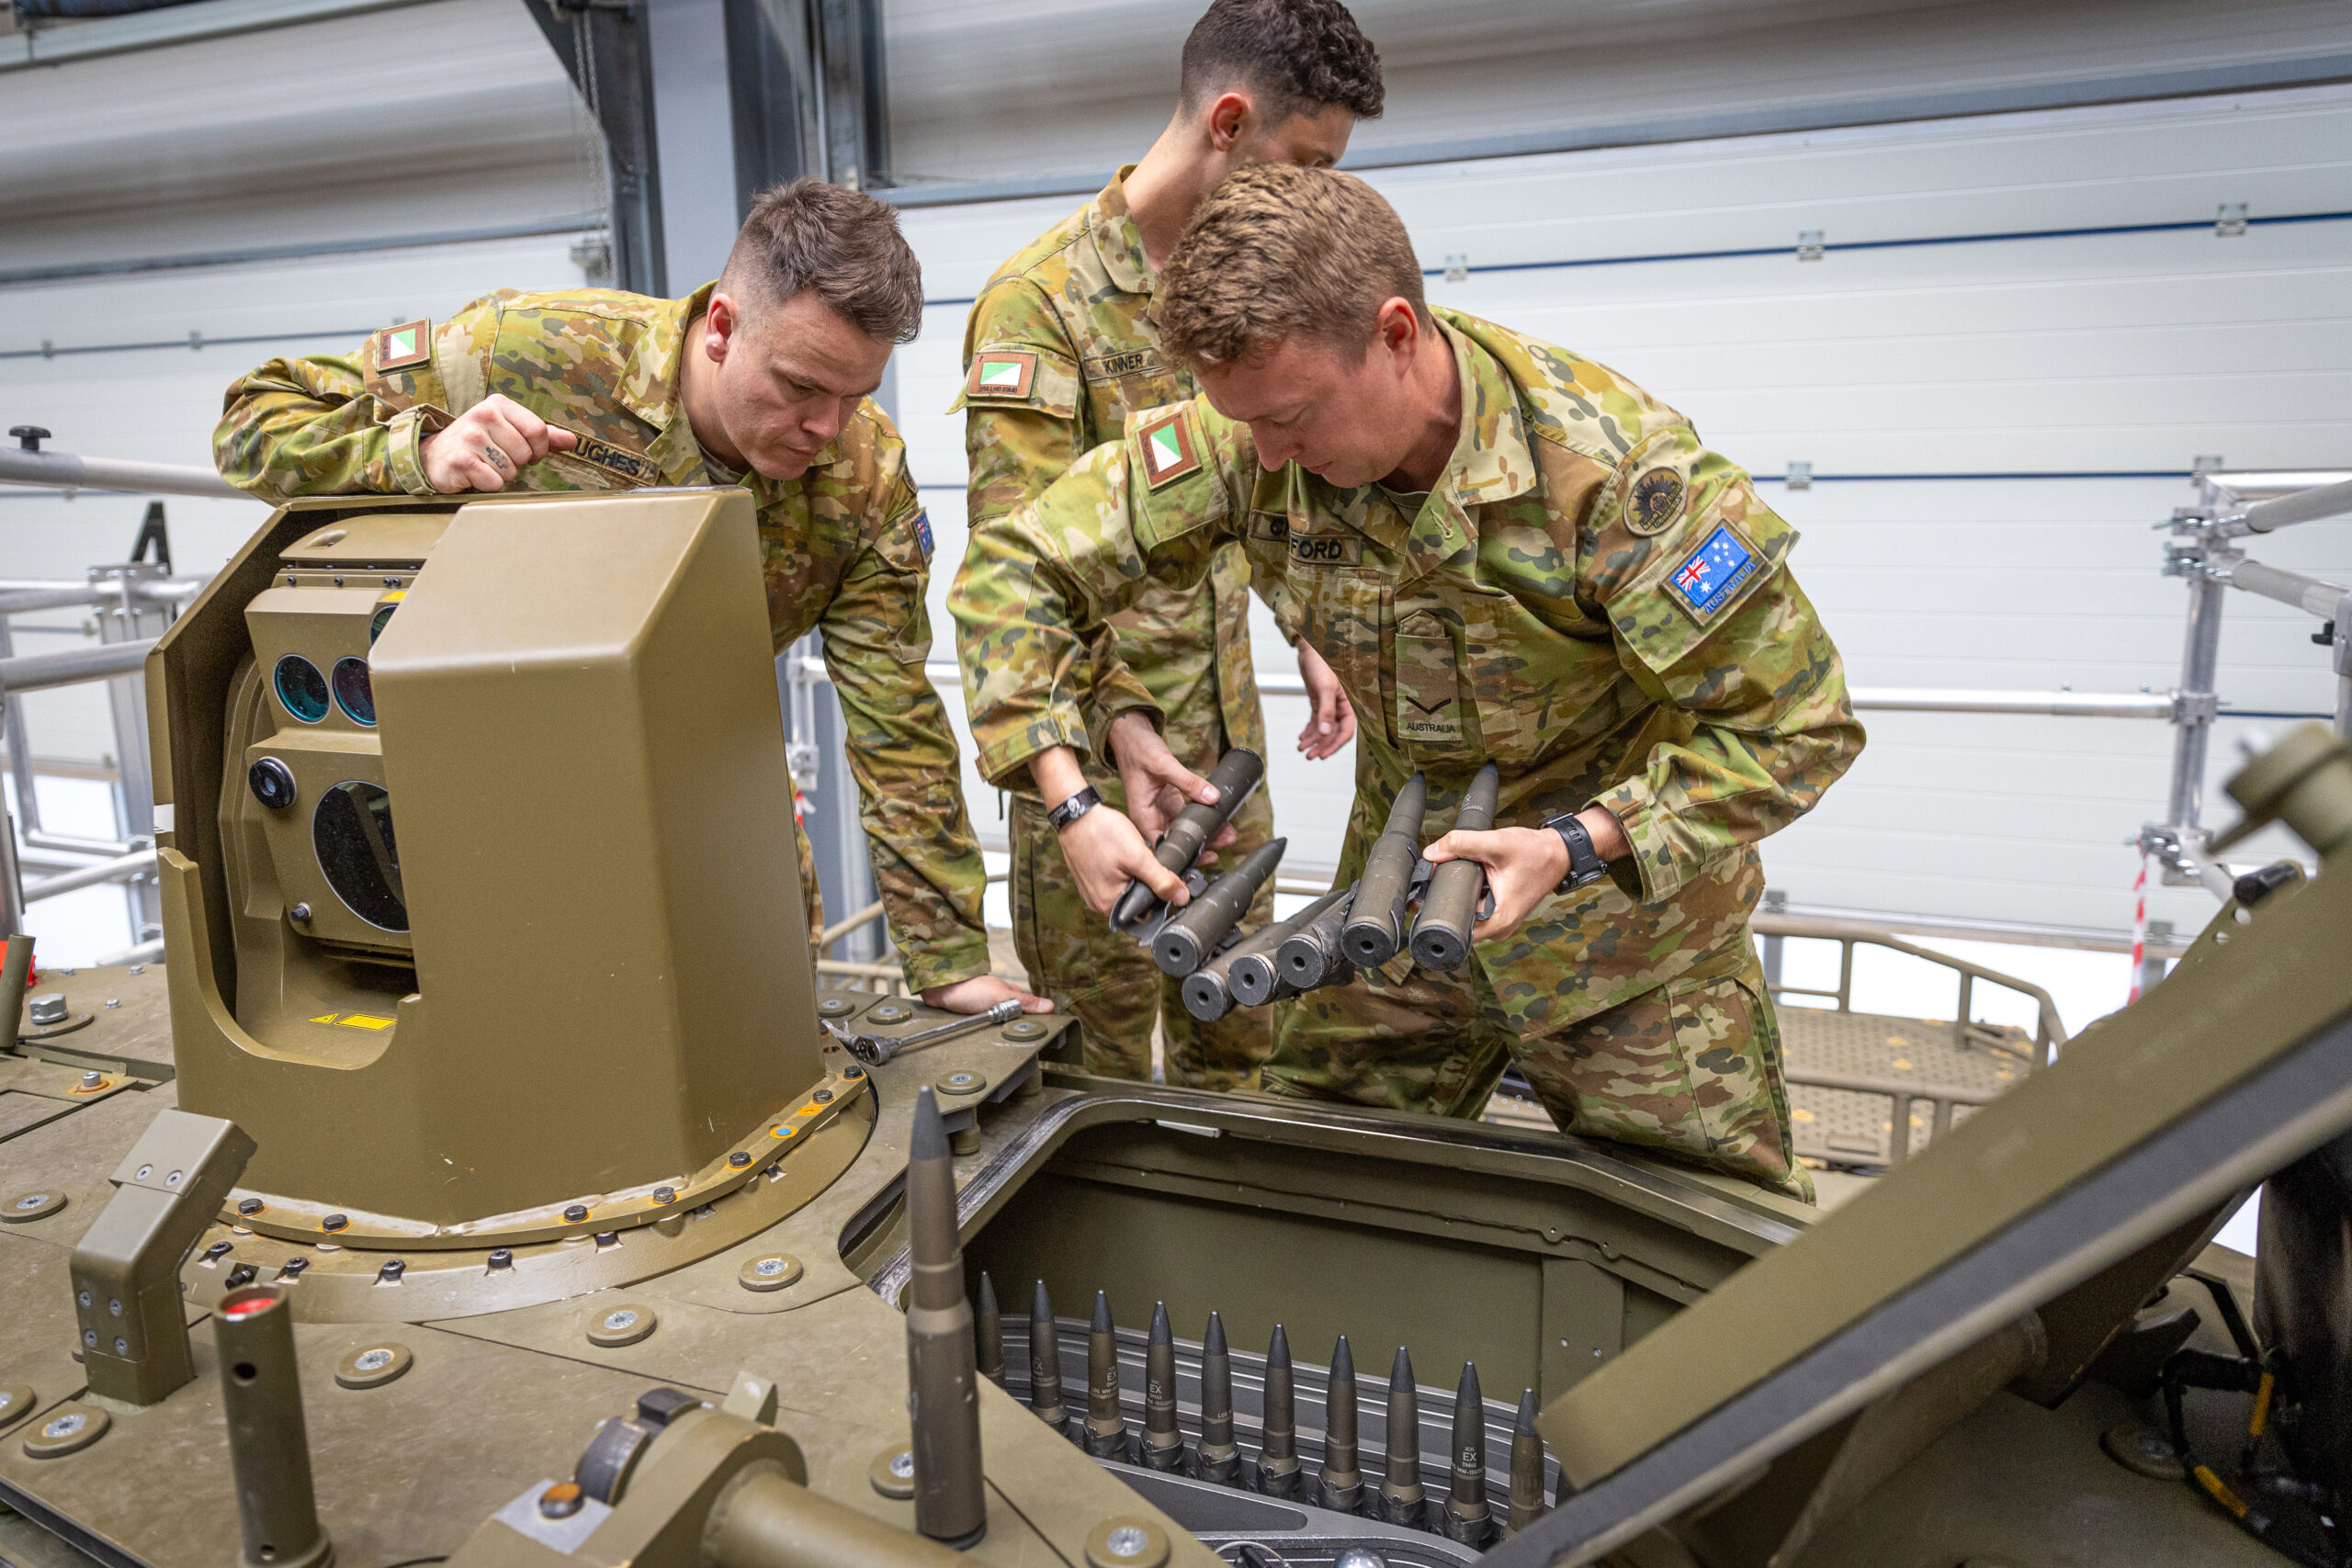 SGT Chris Hughes, LCPL Ben Crawford and TPR Liam Skinner reload the 30mm ammunition magazine on the Boxer Combat Reconnaissance Vehicle. *** Local Caption *** Testing of the Boxer Combat Reconnaissance Vehicle was recently undertaken in Germany, by members of CASG Land Domain and 2/14 LHR (QMI). Tests included firing the MK30-2 cannon and MAG58 machine gun in extreme weather conditions, as well as testing the new programmable munitions capability. Three soldiers from 2/14 LHR (QMI) were involved in testing at the Rheinmetall site in Unterluss, Germany, where the vehicle’s Lance 2.0 turret was designed and initial production has commenced. The visit included a brief on the Block II vehicle design, operation of the Combat Intelligence, Surveillance and Reconnaissance system and new weapon control systems. Development of these systems included input from 2/14 LHR soldiers, leveraging their experience with the Block I vehicles.